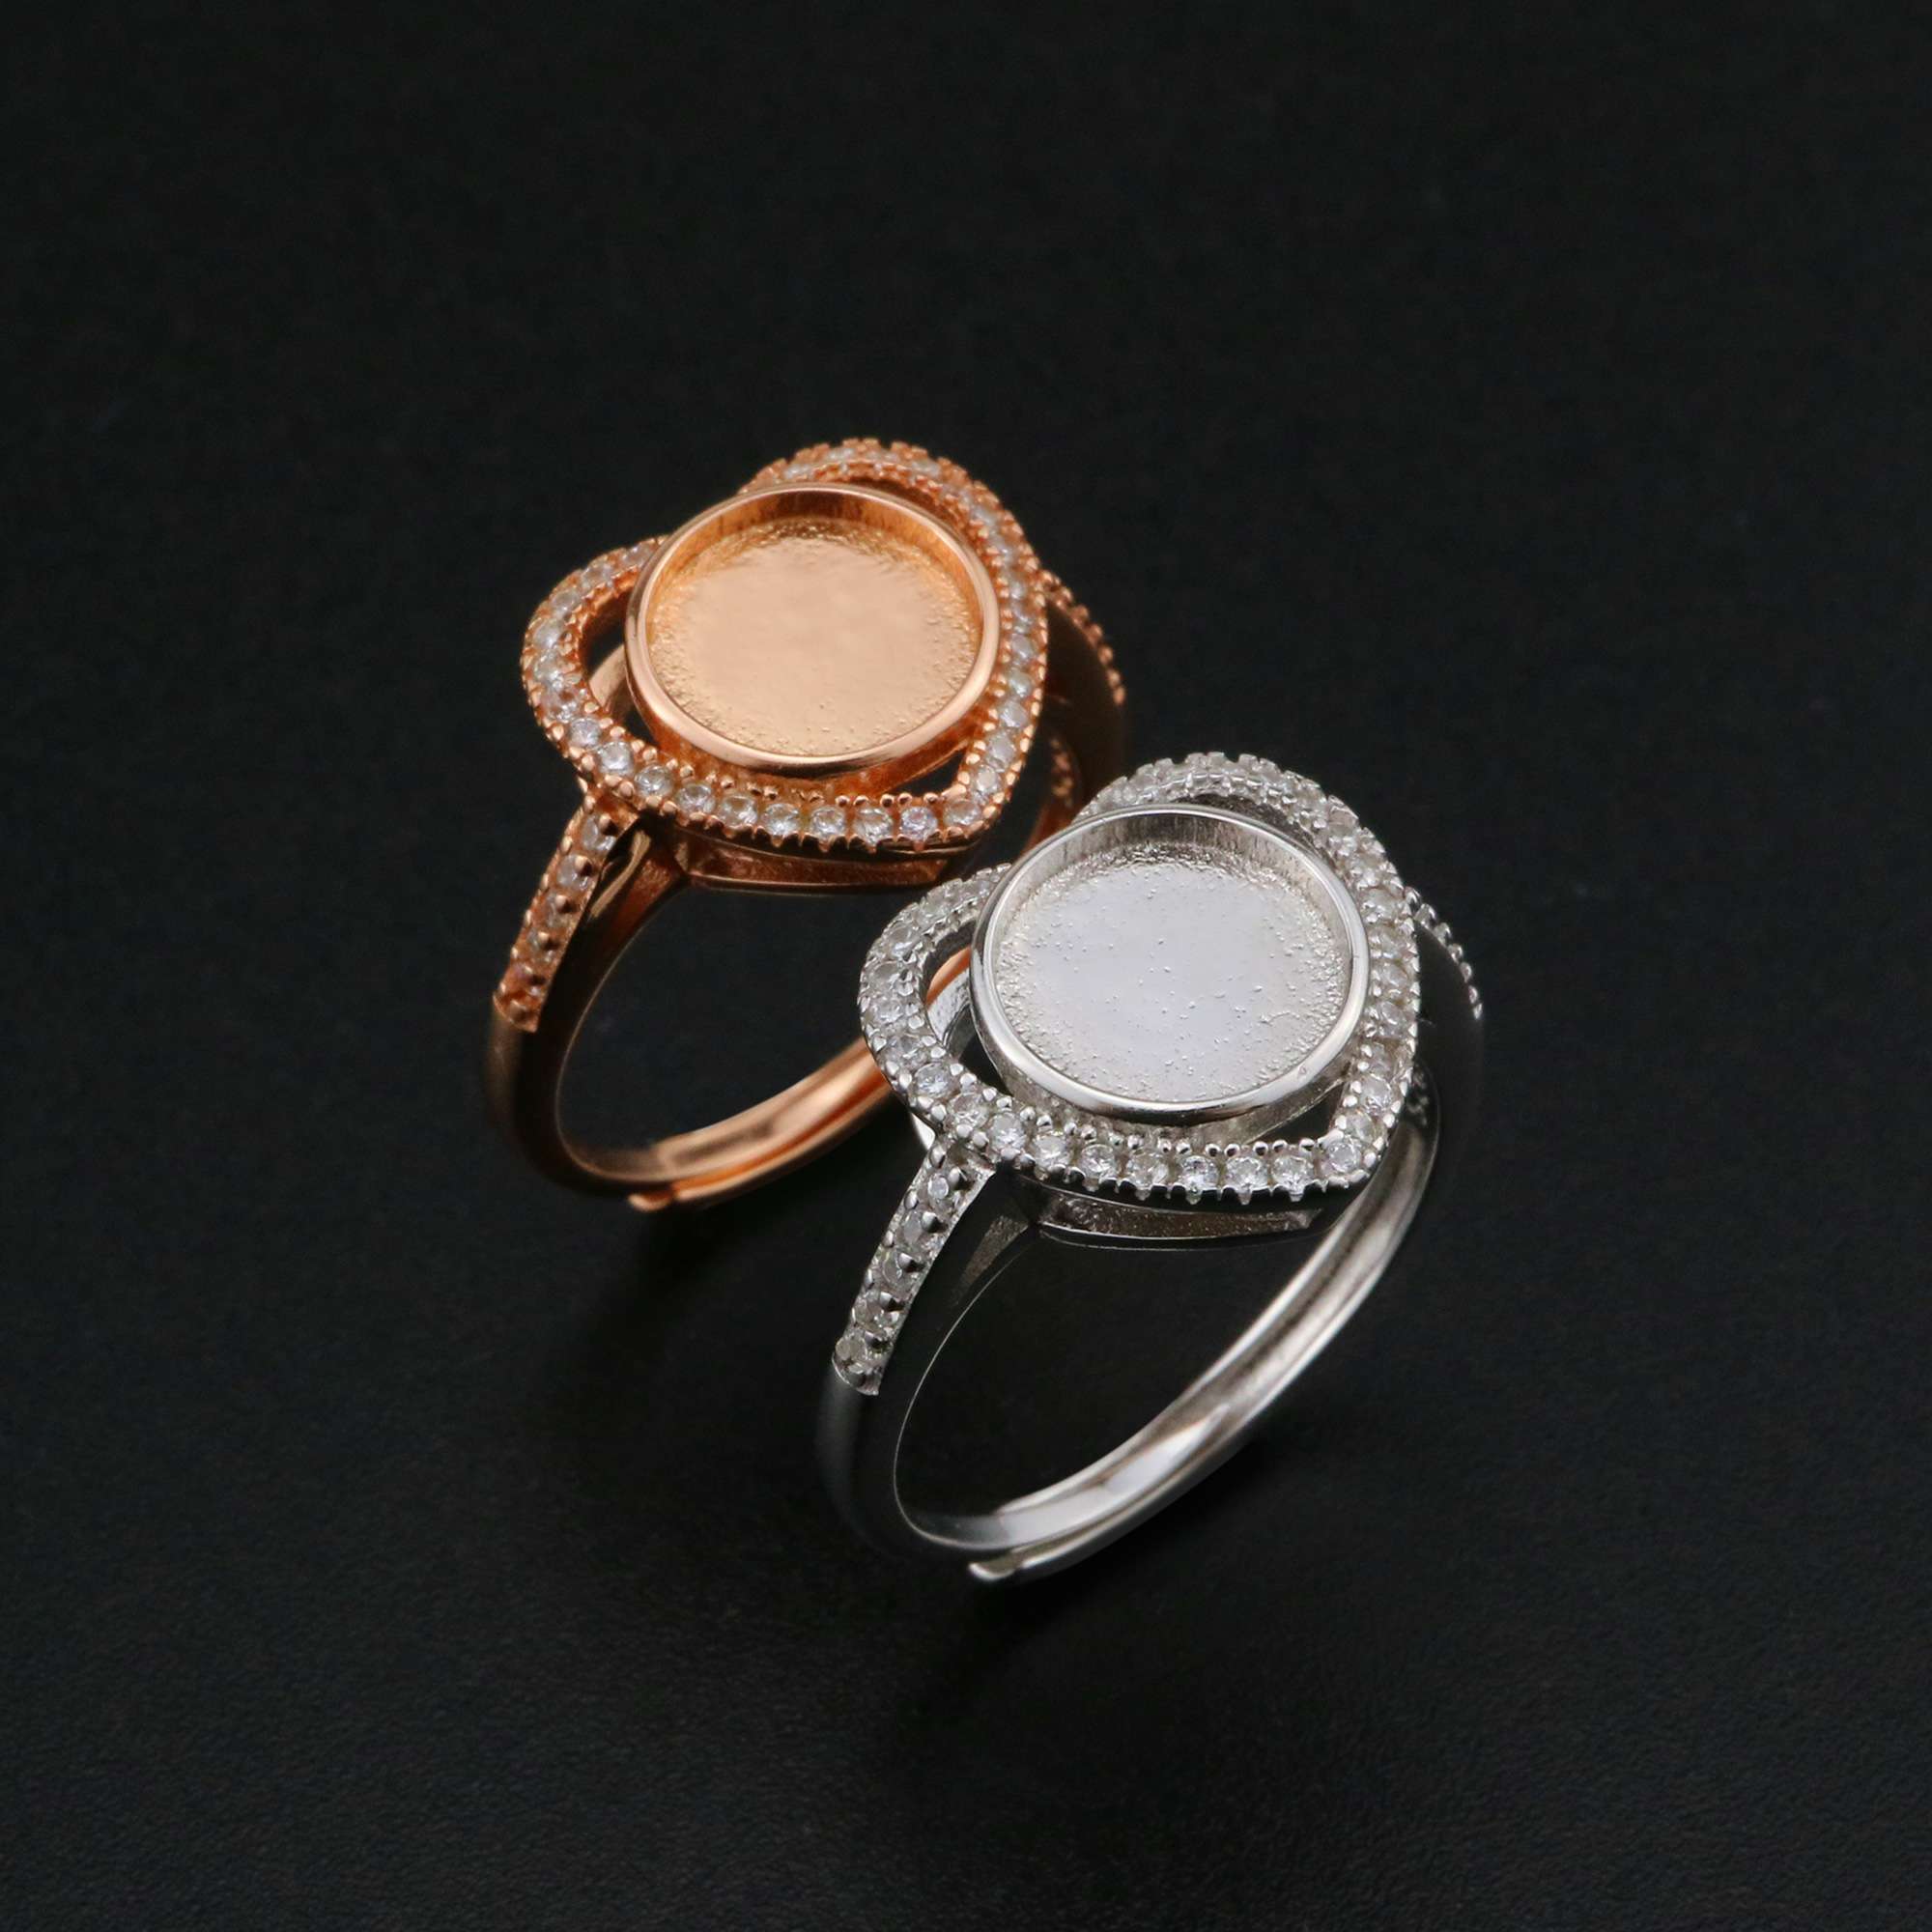 Keepsake Breast Milk Resin Ring Settings Round Solid Back 925 Sterling Silver Rose Gold Plated 8MM Halo Heart CZ Stone Ring Bezel 1210093 - Click Image to Close